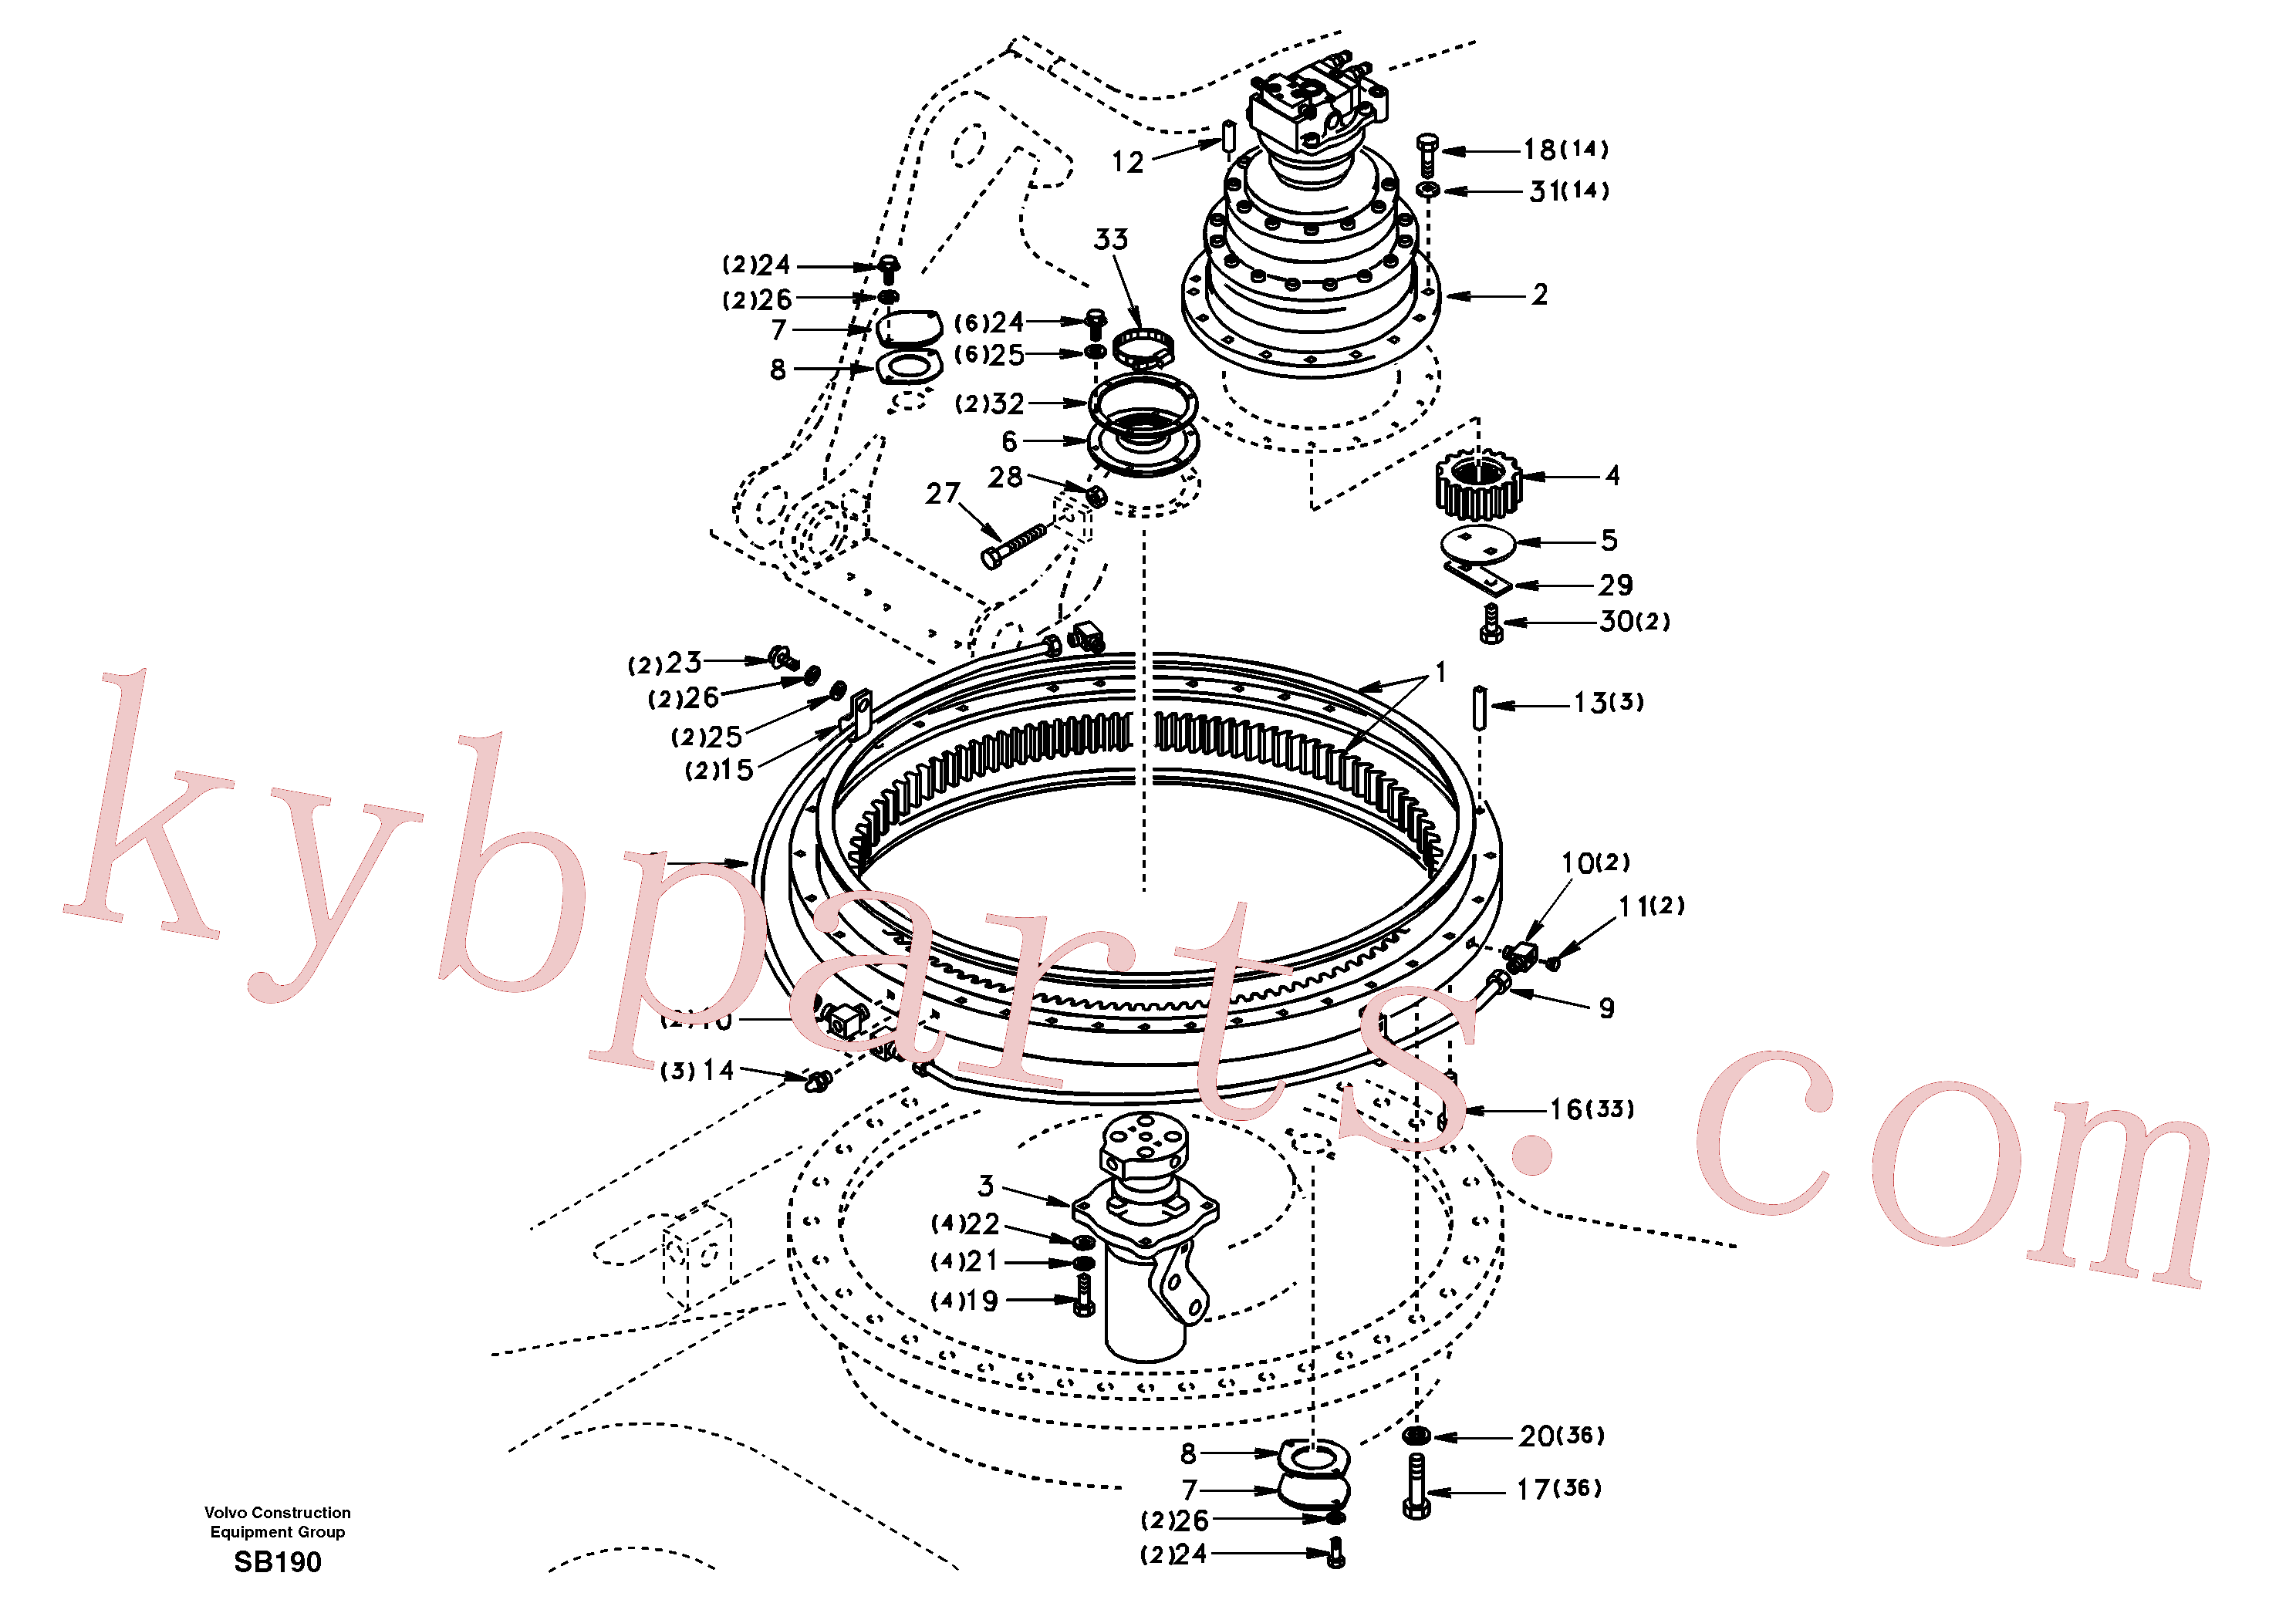 SA7118-34000 for Volvo Swing system(SB190 assembly)